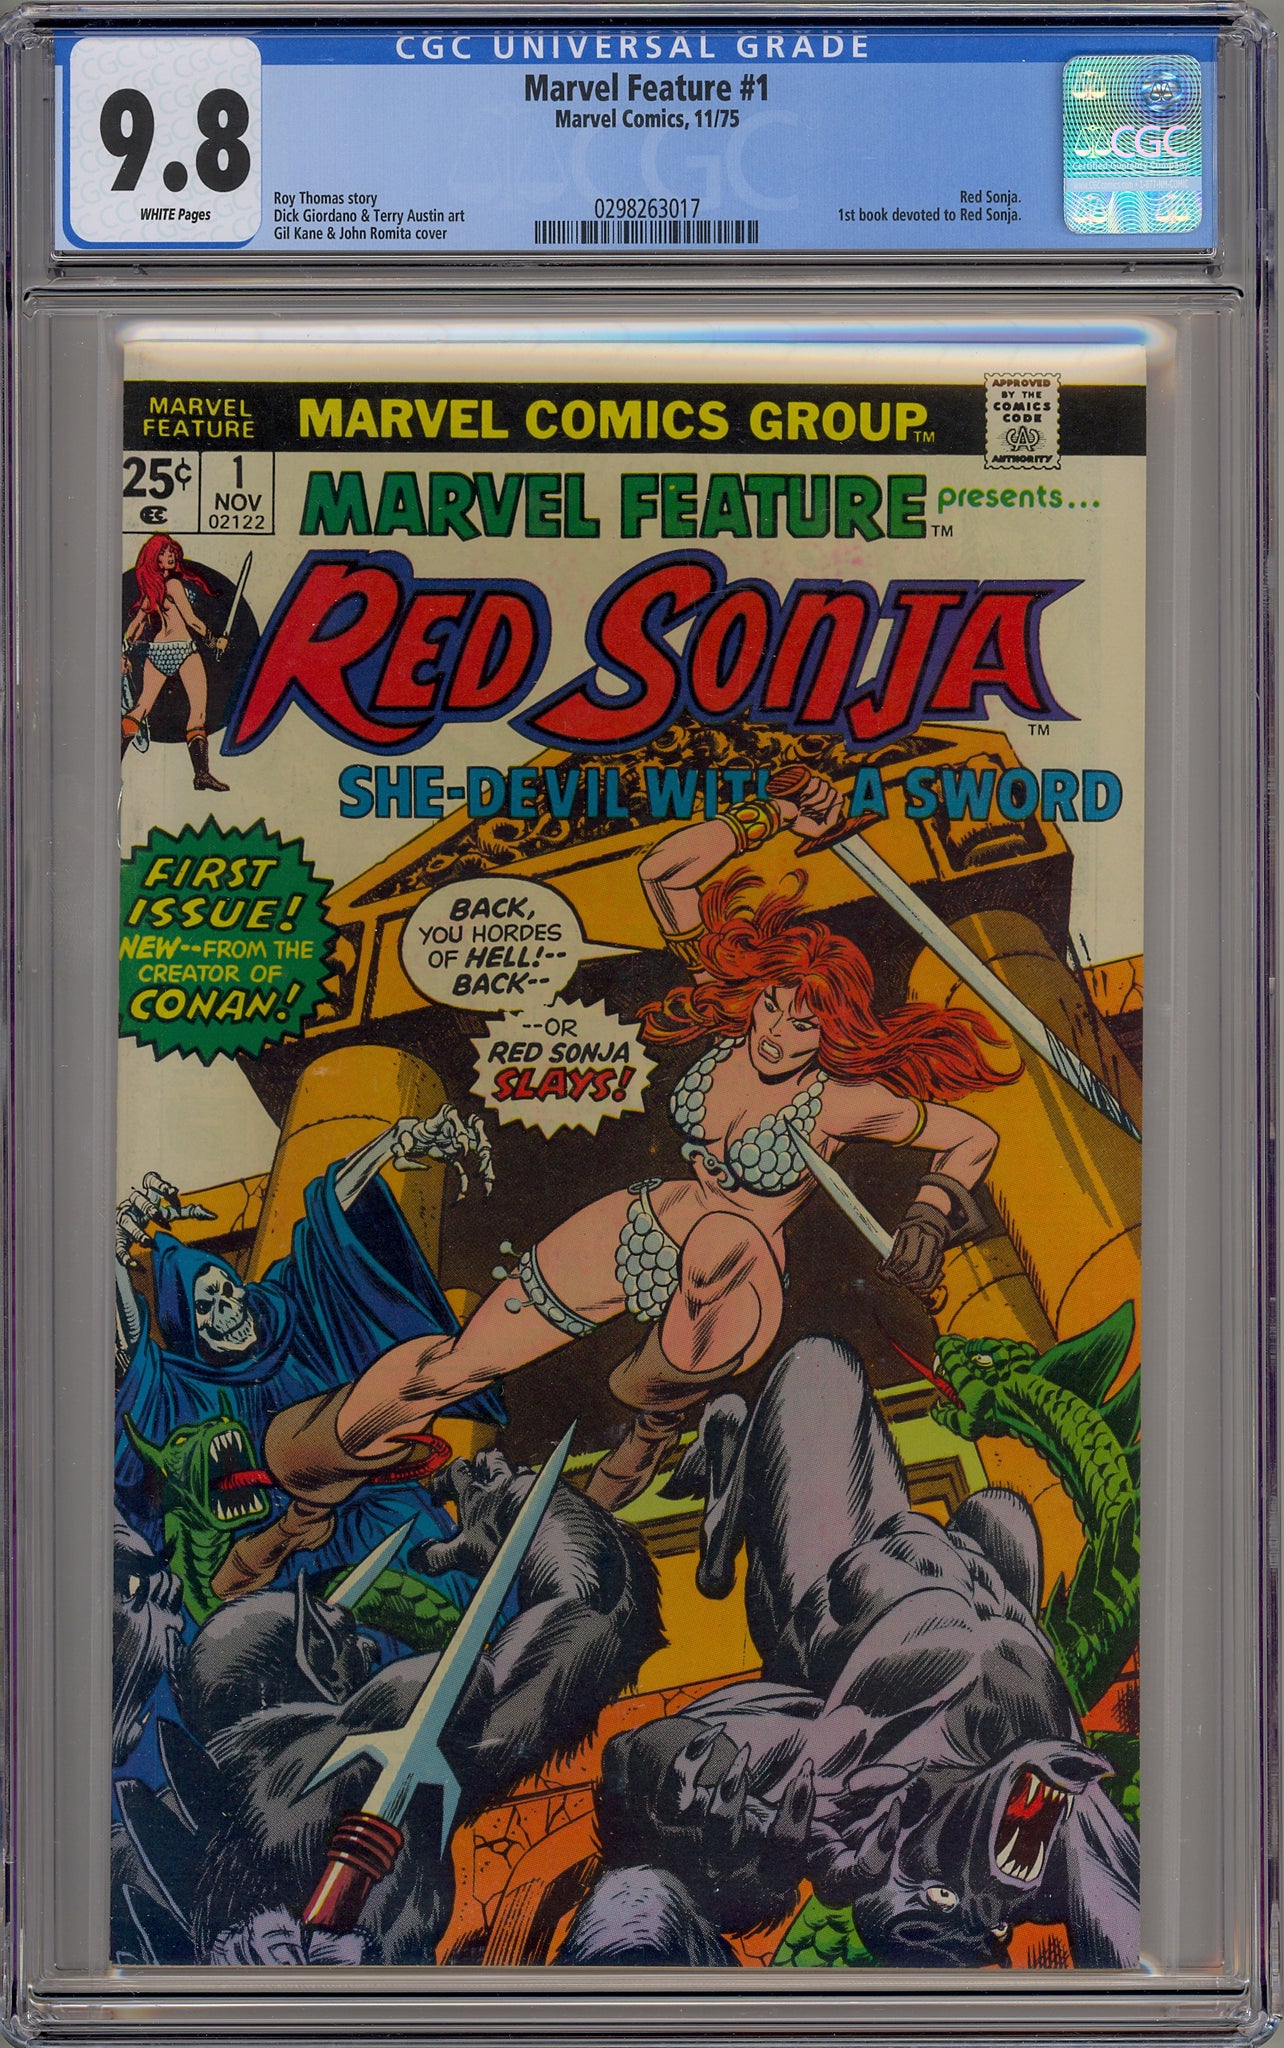 Marvel Feature #1 (1975) Red Sonja